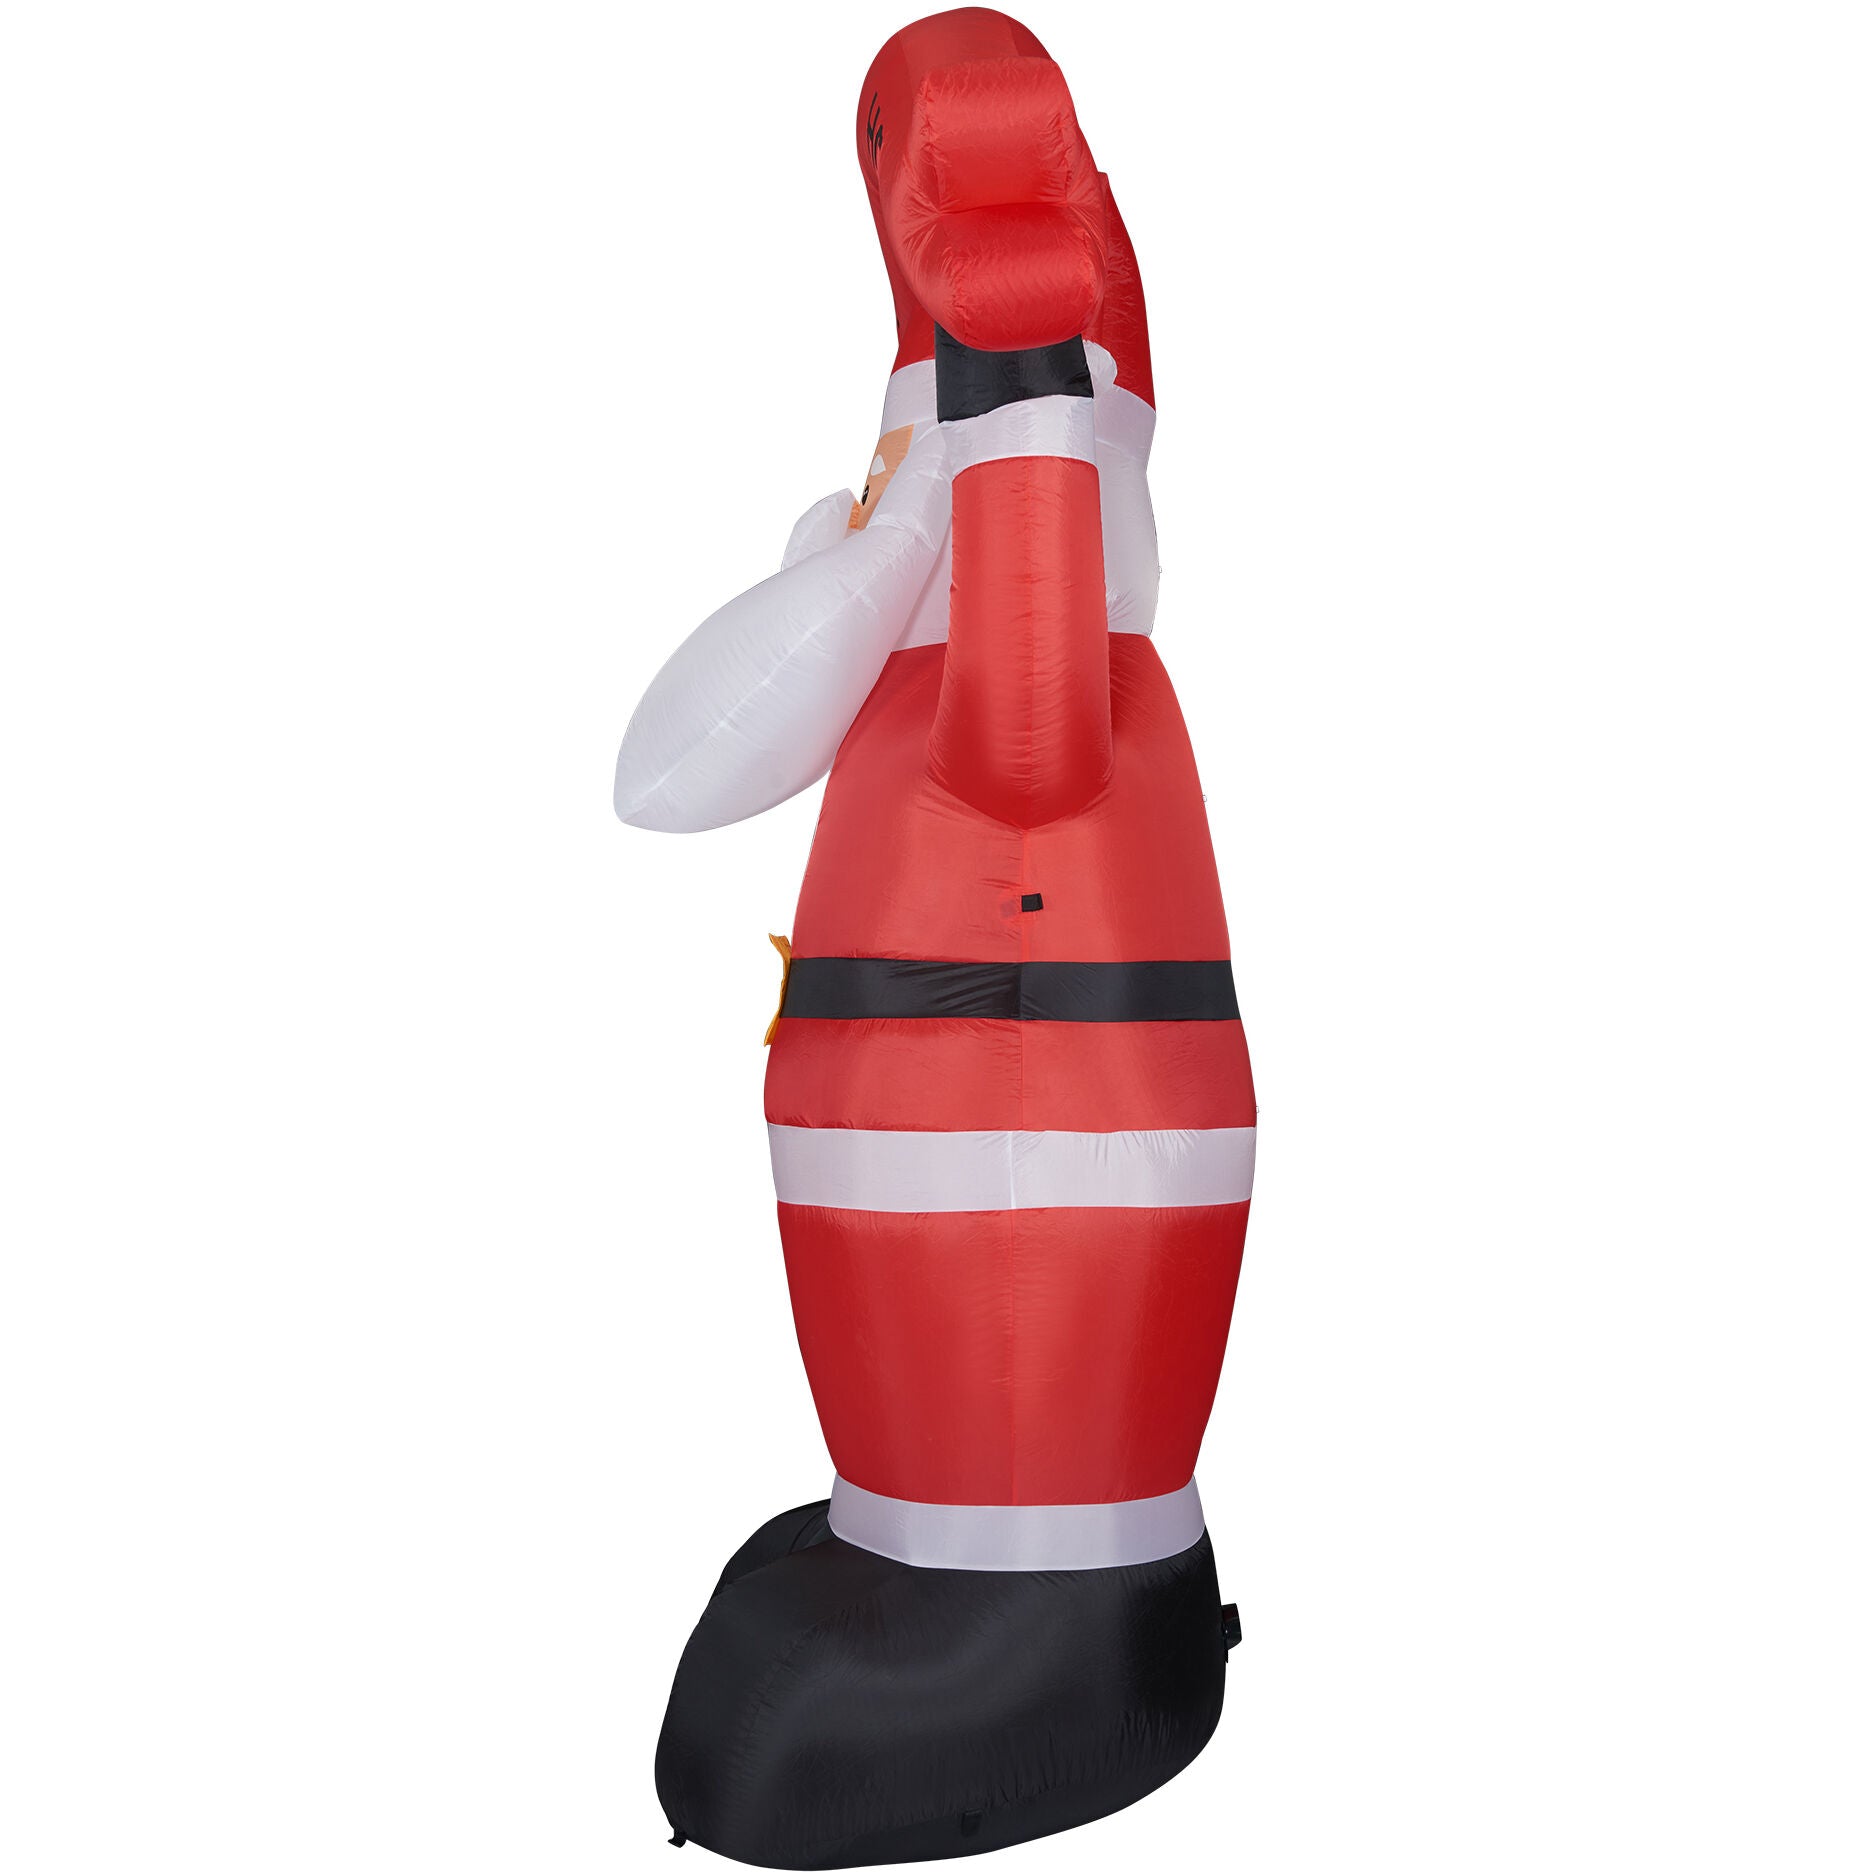 Fraser Hill Farm -  10-Ft. Tall Santa Holding HO HO HO Sign, Outdoor Blow-Up Christmas Inflatable with Lights and Storage Bag